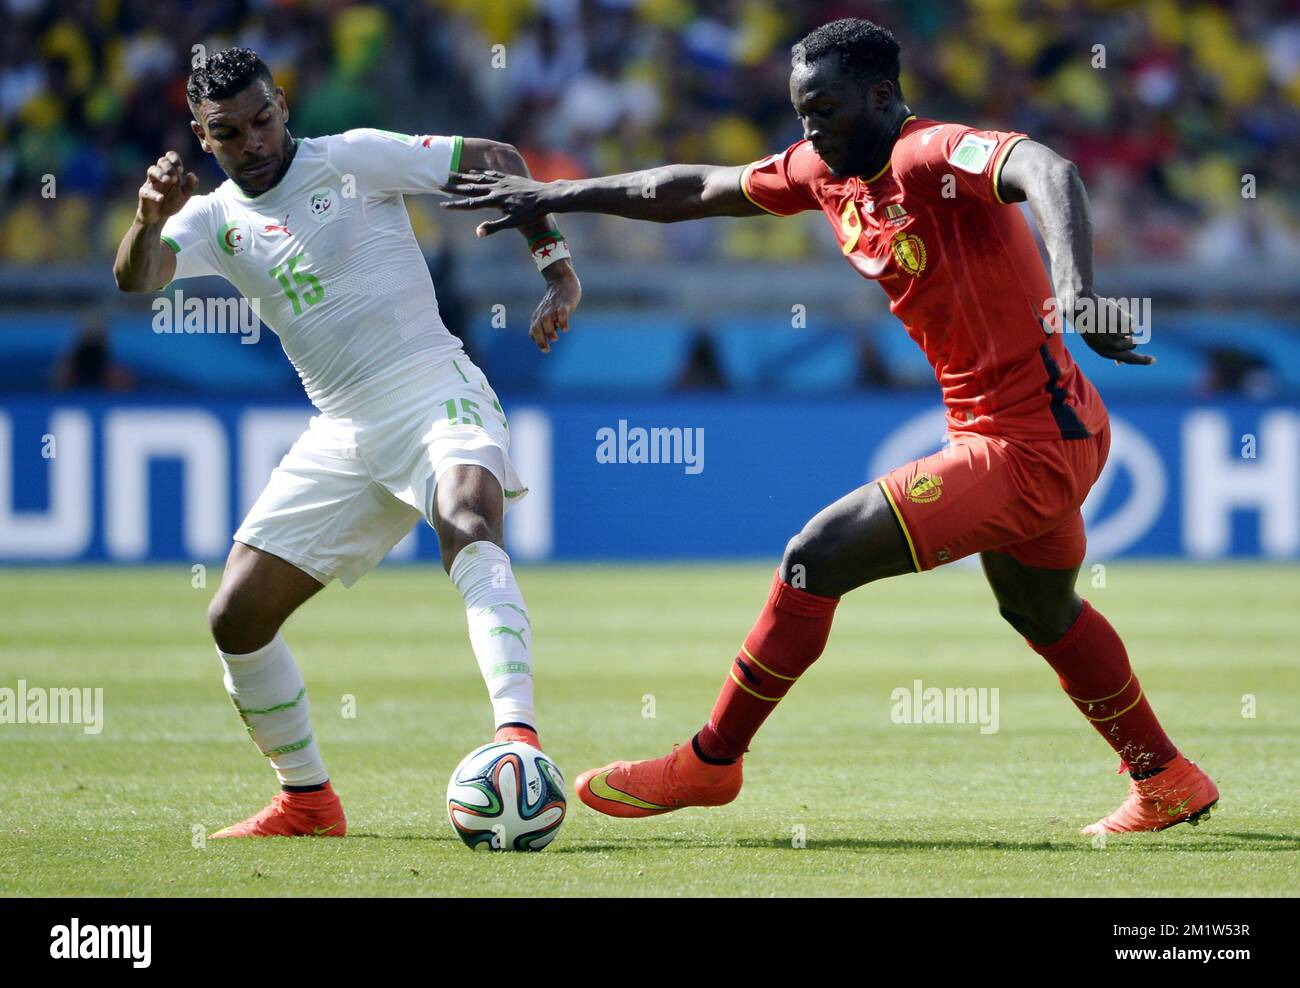 Algeria's El Arbi Hillel Soudani and Belgium's Romelu Lukaku fight for the ball during a soccer game between Belgian national team The Red Devils and Algeria in Belo Horizonte, Brazil, the first game in Group H of the first round of the 2014 FIFA World Cup, Tuesday 17 June 2014.  Stock Photo